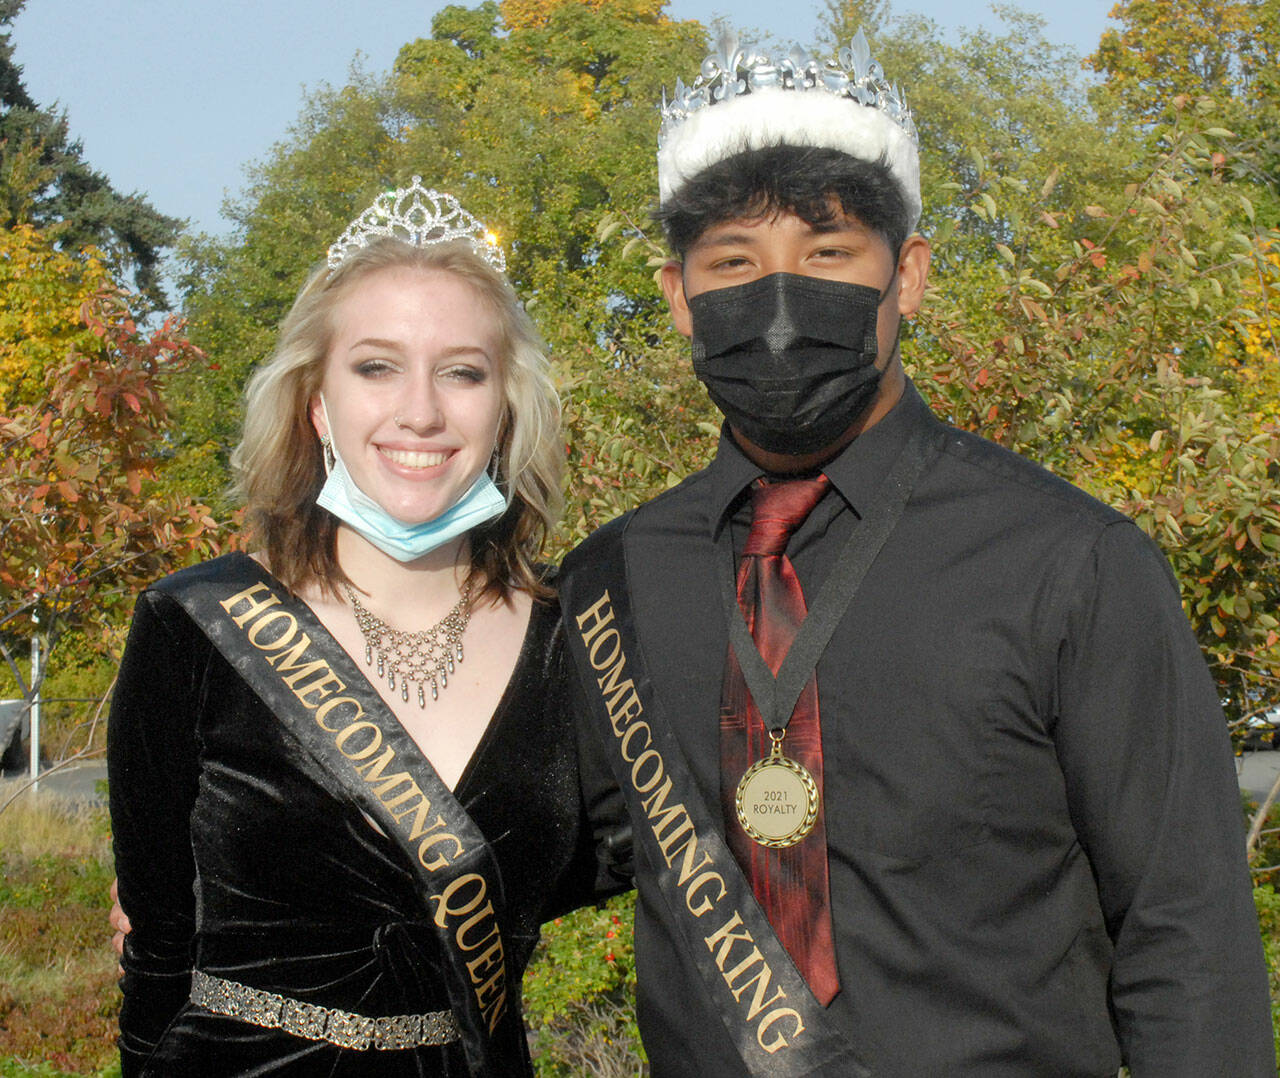 Port Angeles High School’s Samantha Robbins and Lance Menes stand together as homecoming senior queen and king before the school’s homecoming parade on Friday. The pair presided over festivities at the Roughriders’ football game on Friday night against the Kennedy Catholic Lancers. (Keith Thorpe/Peninsula Daily News)